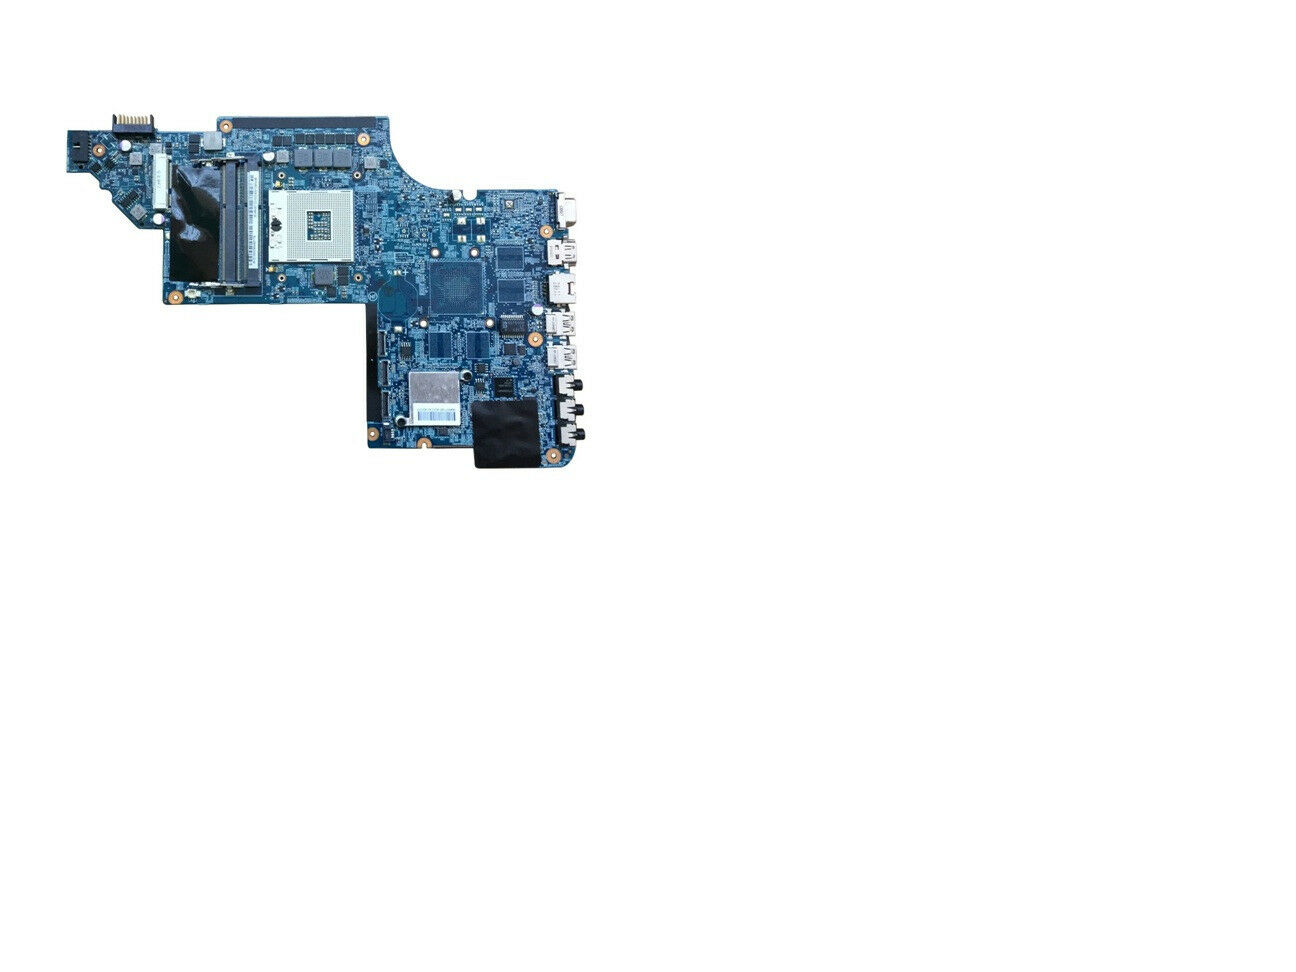 HP Pavilion DV7-6C00 Series Intel Laptop Motherboard from dv-7-6c43cl Brand: HP Compatible CPU Brand: AMD I